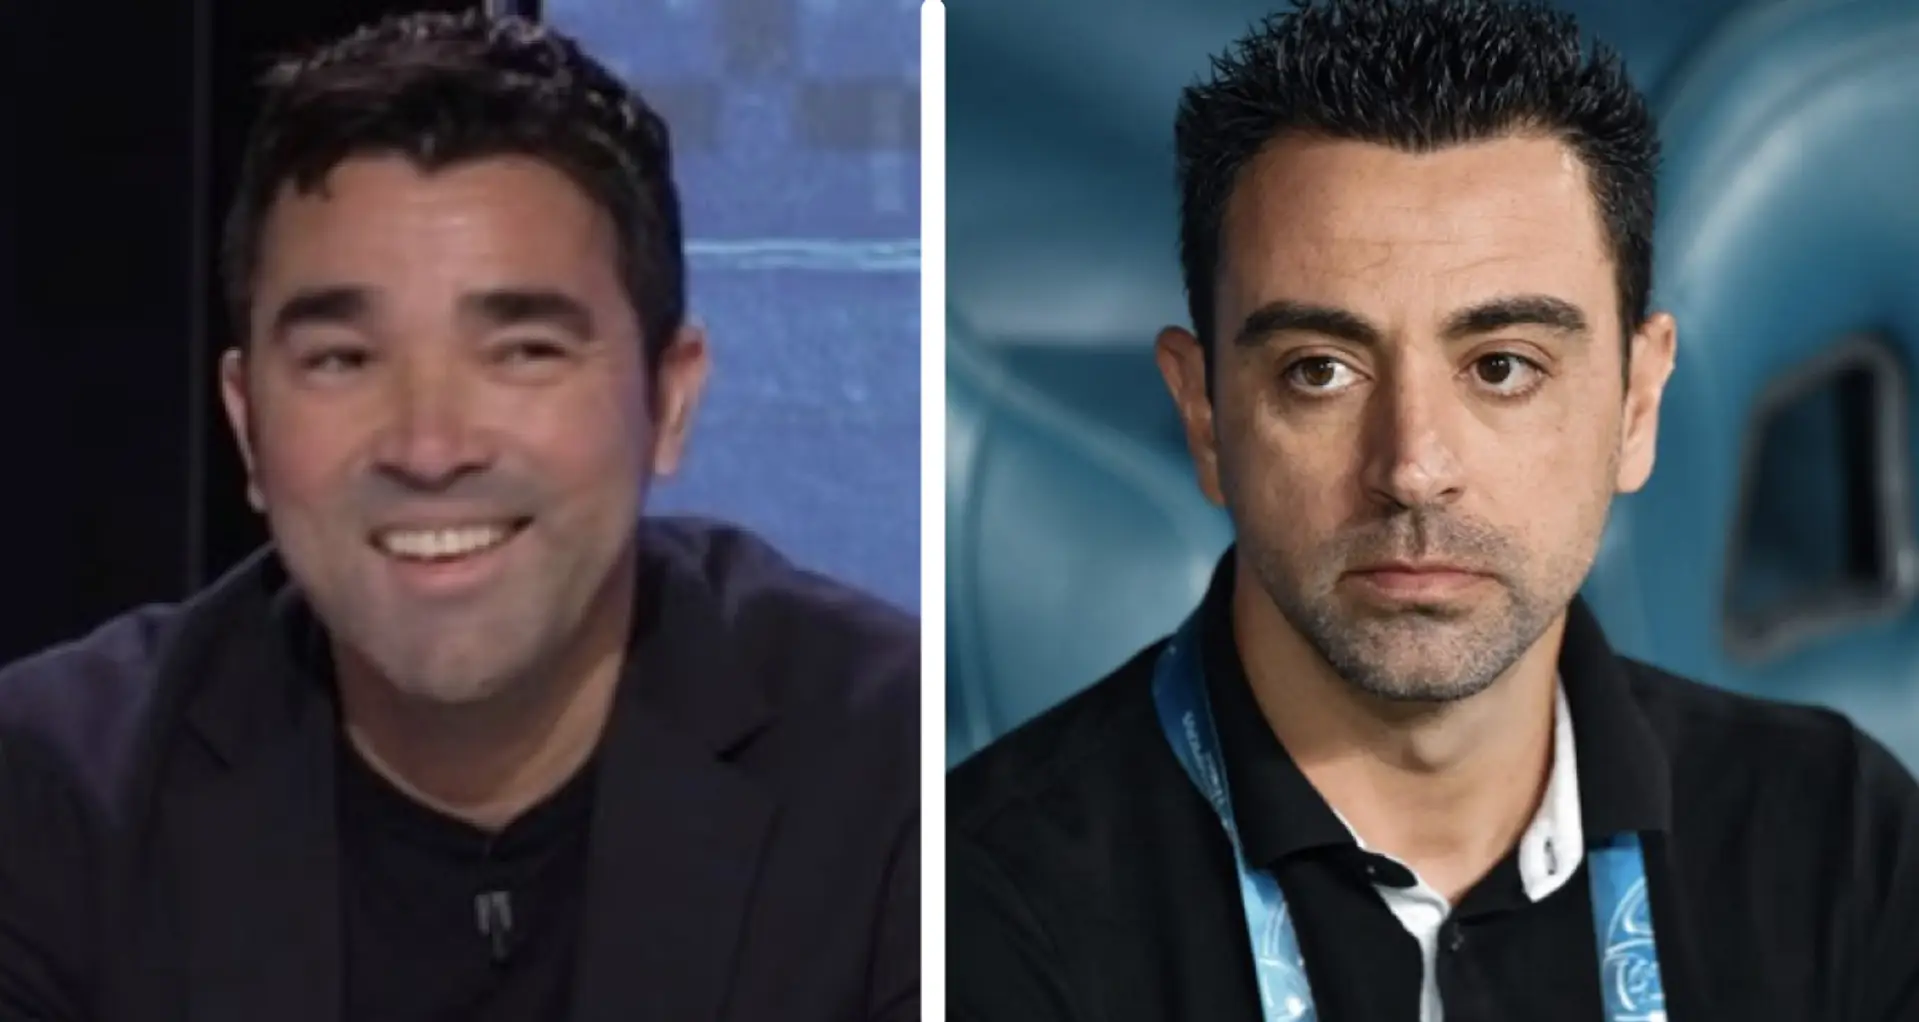 Deco says future coach 'should break with Barca's past once and forever' – Xavi has his say on it